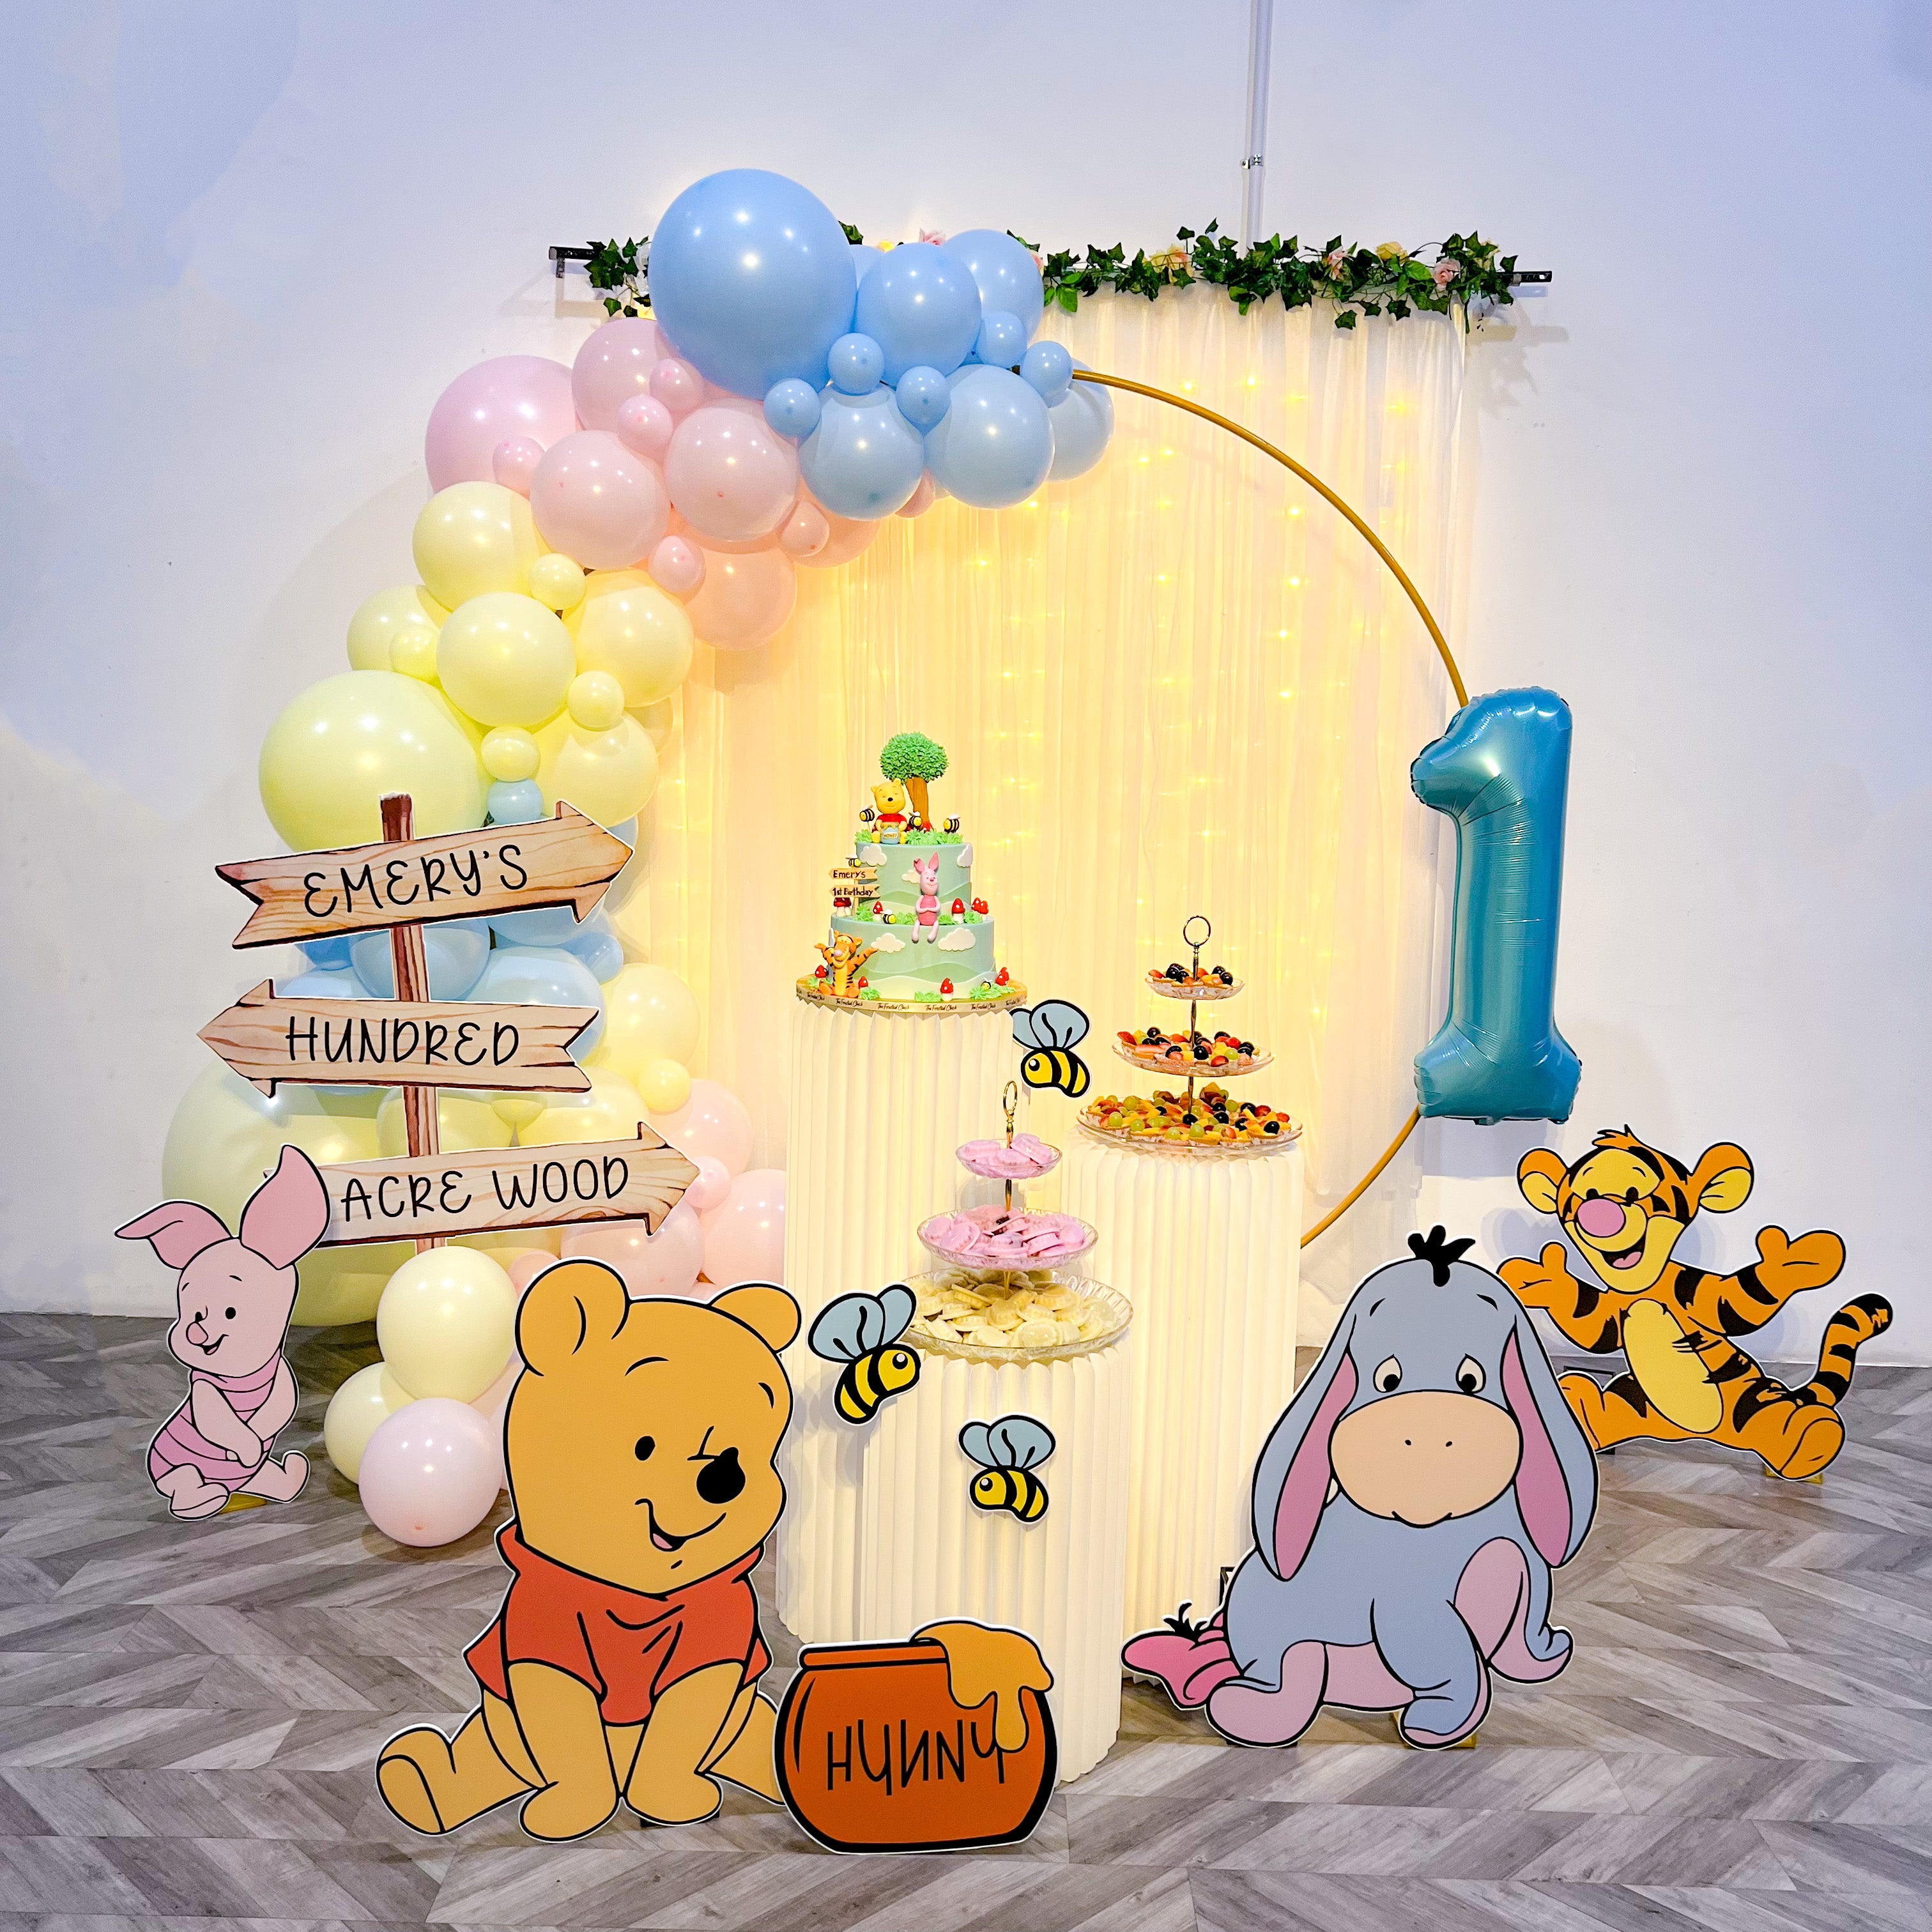 Hundred Acre Wood , Winnie The Pooh Theme Decor , Dessert Table, Balloon Backdrop, Birthday Party